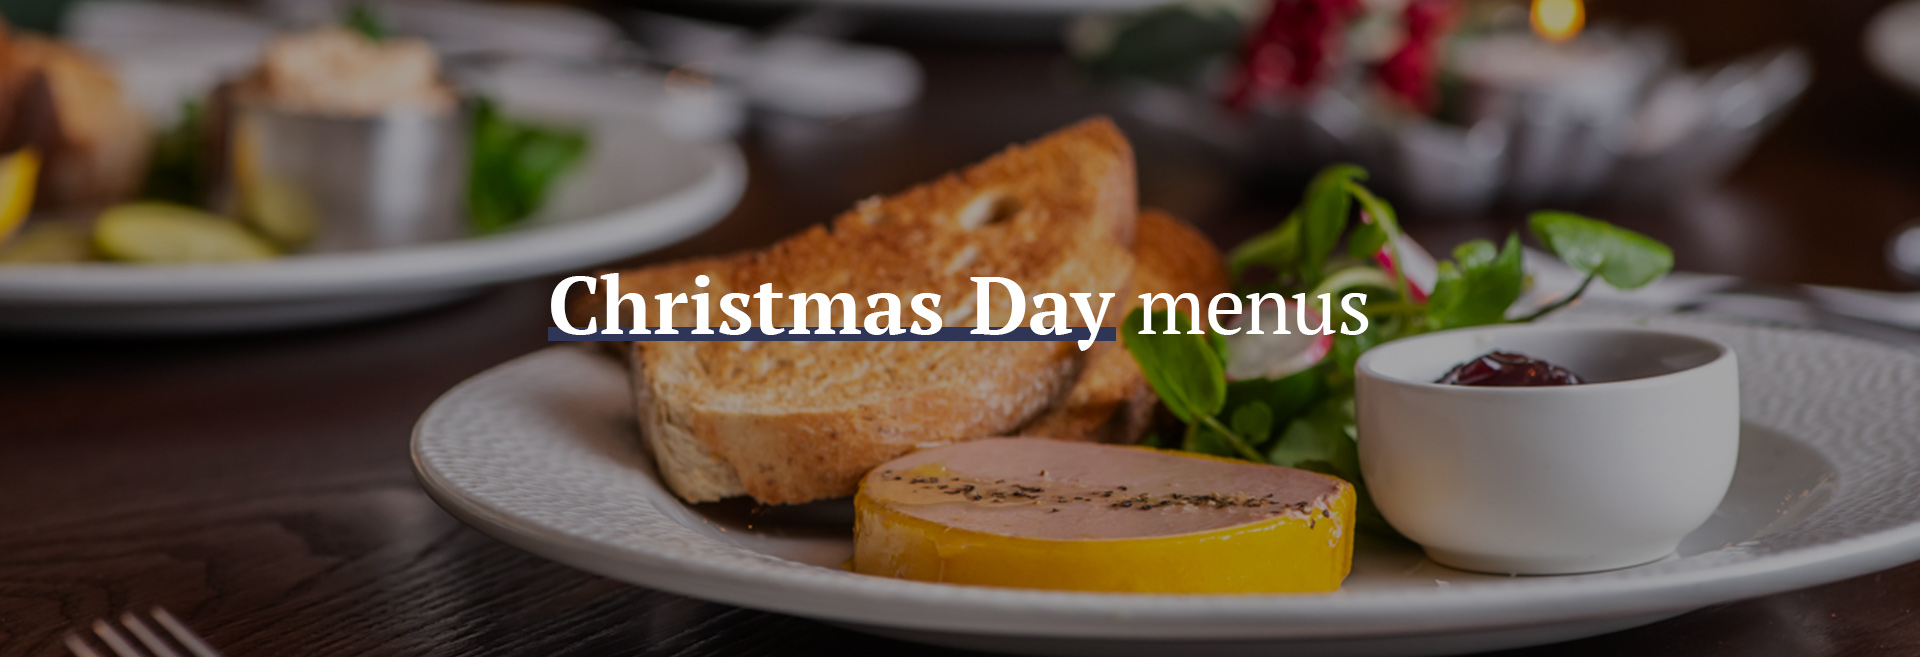 Christmas Day Menu at The Old White Lion